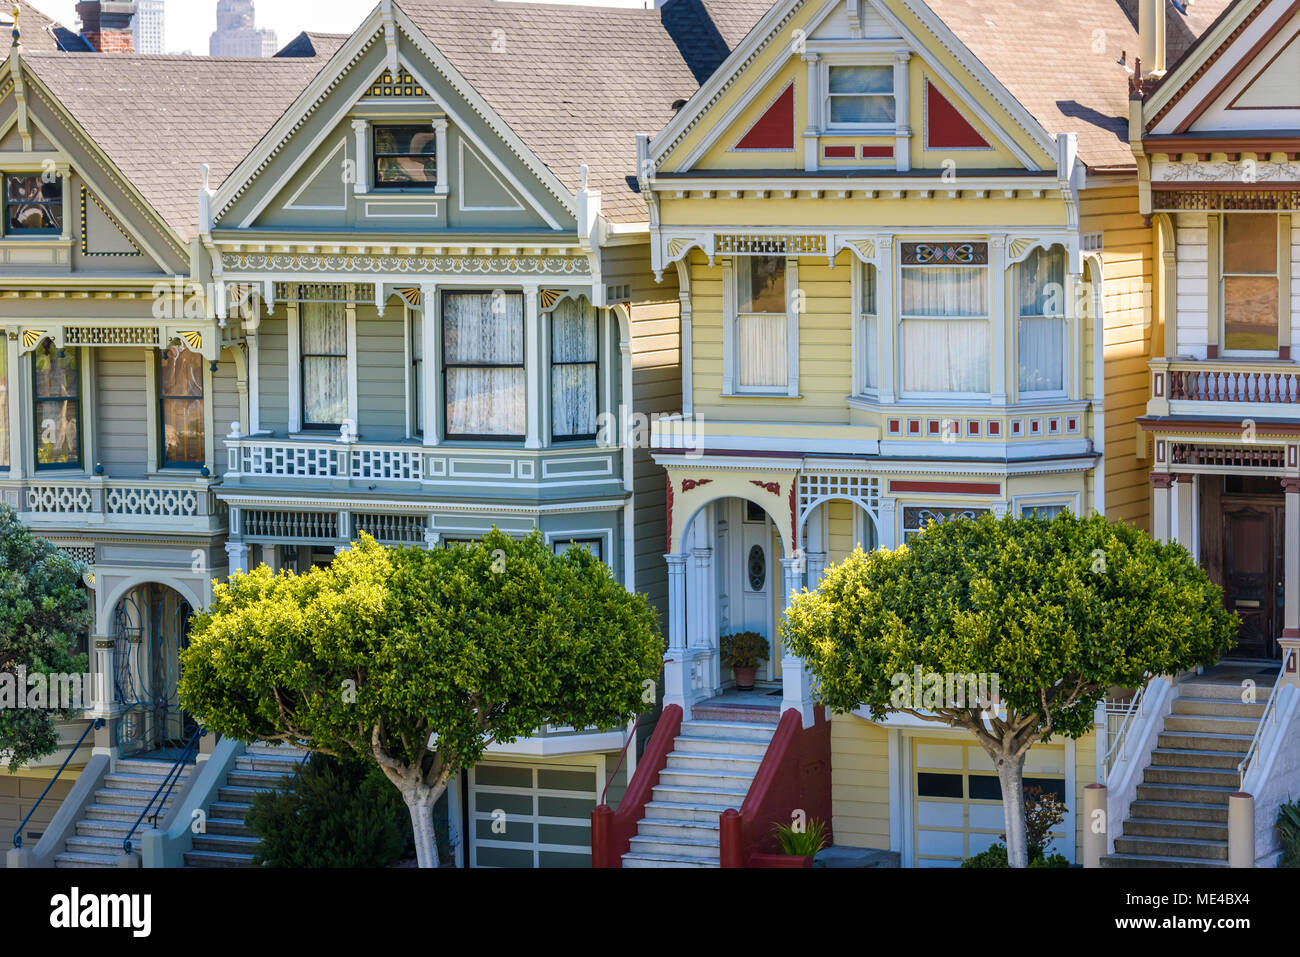 Beautiful view of Painted Ladies, colorful Victorian houses located near scenic Alamo Square in a row, on a summer day with blue sky, San Francisco, C Stock Photo